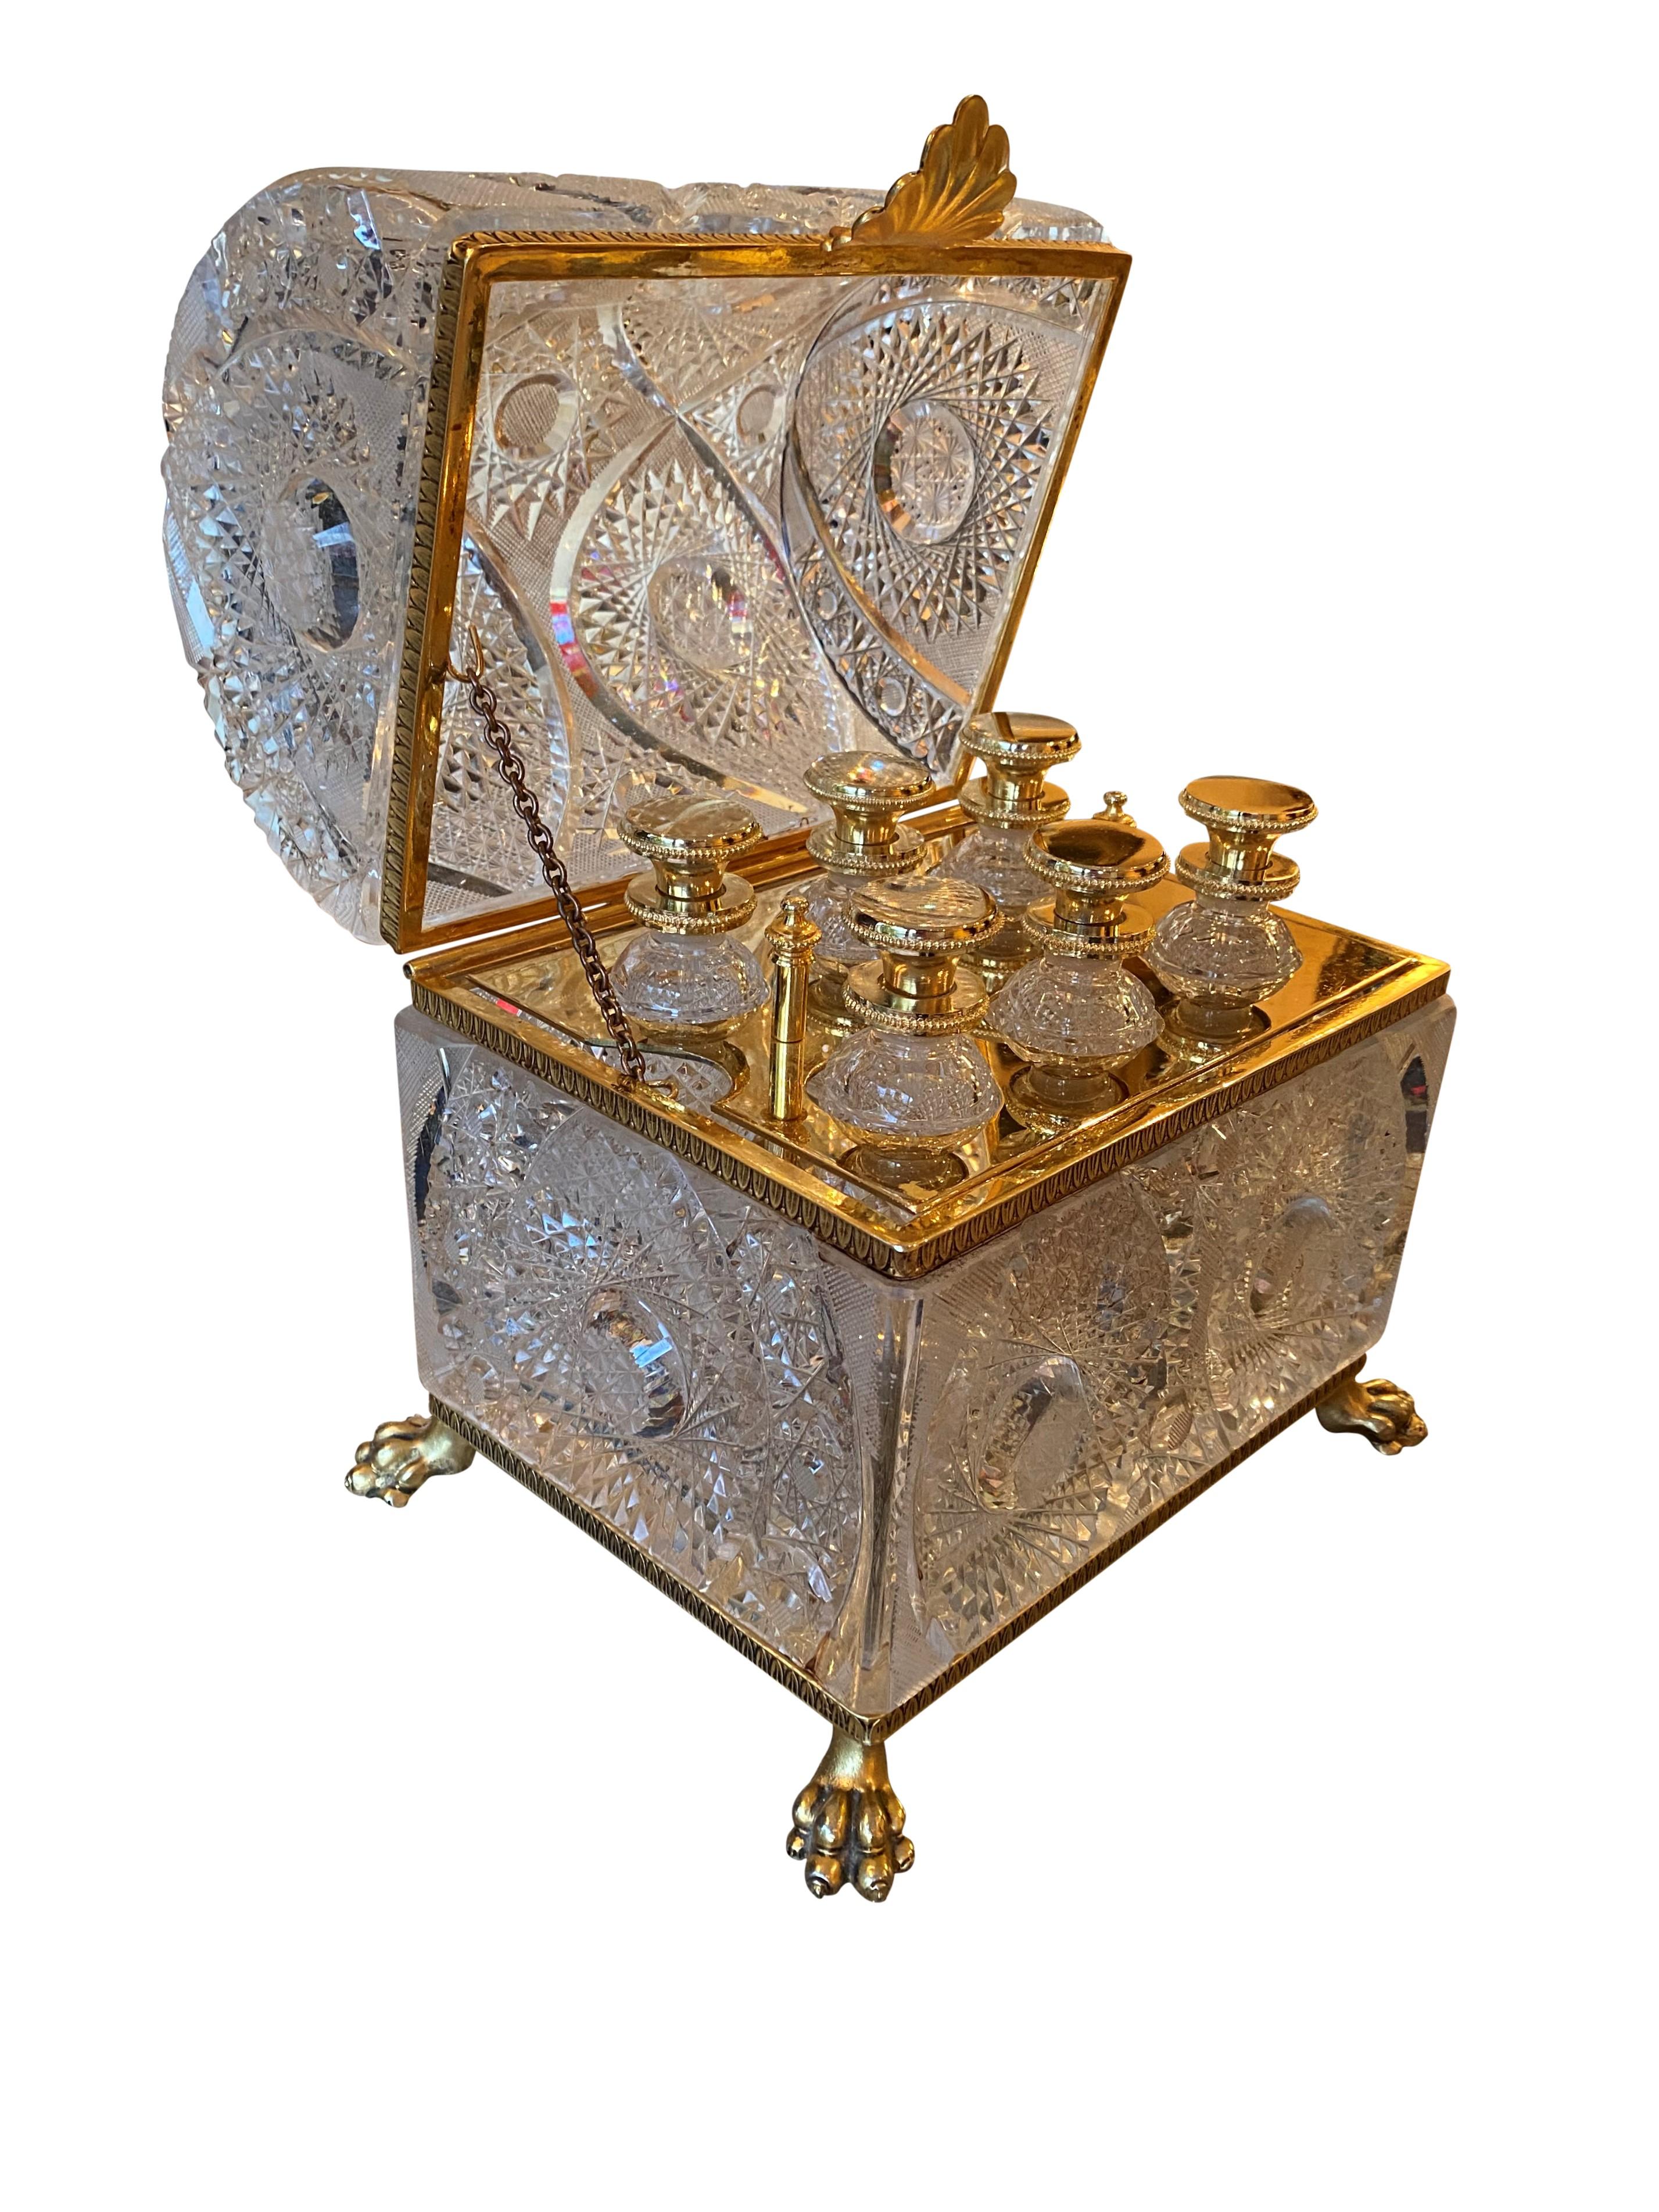 French Gilt Bronze Mounted Cut Glass Domed Casket Cristal Frères, Martin Benito 2